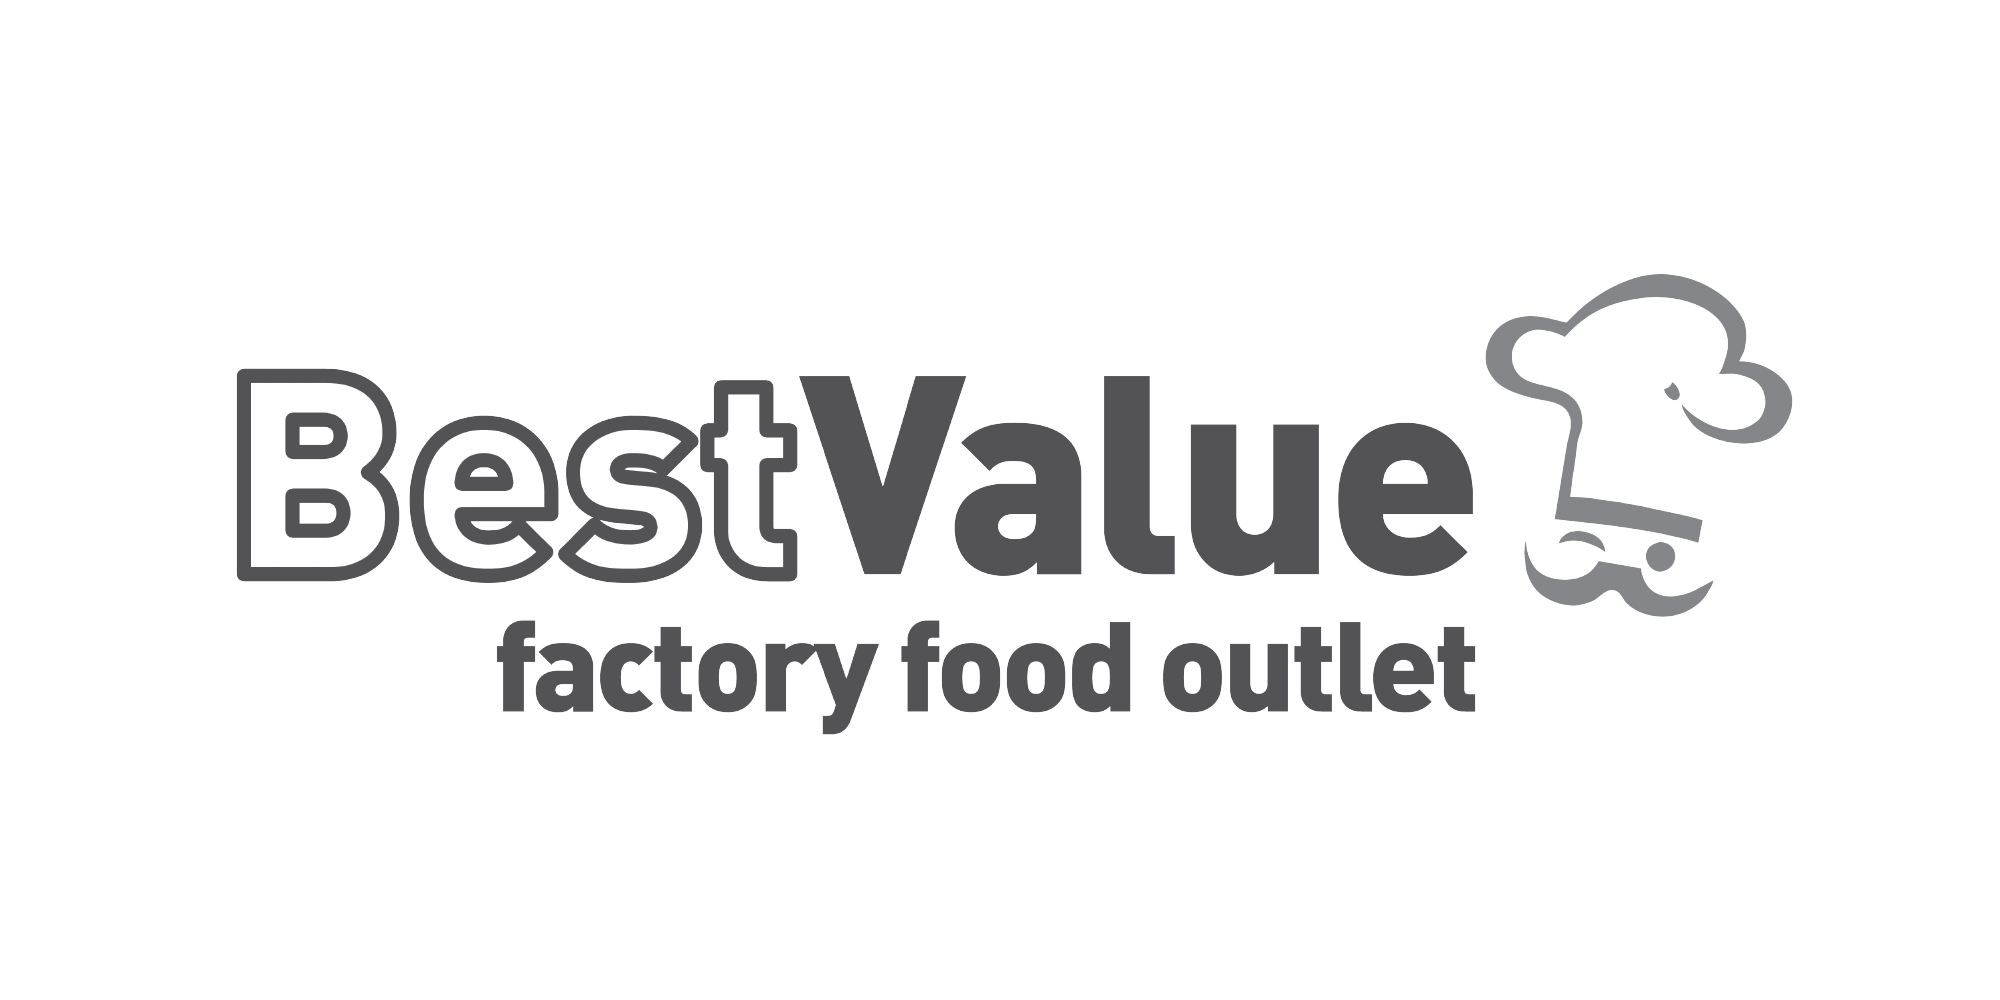 Best Value factory food outlet gray logo